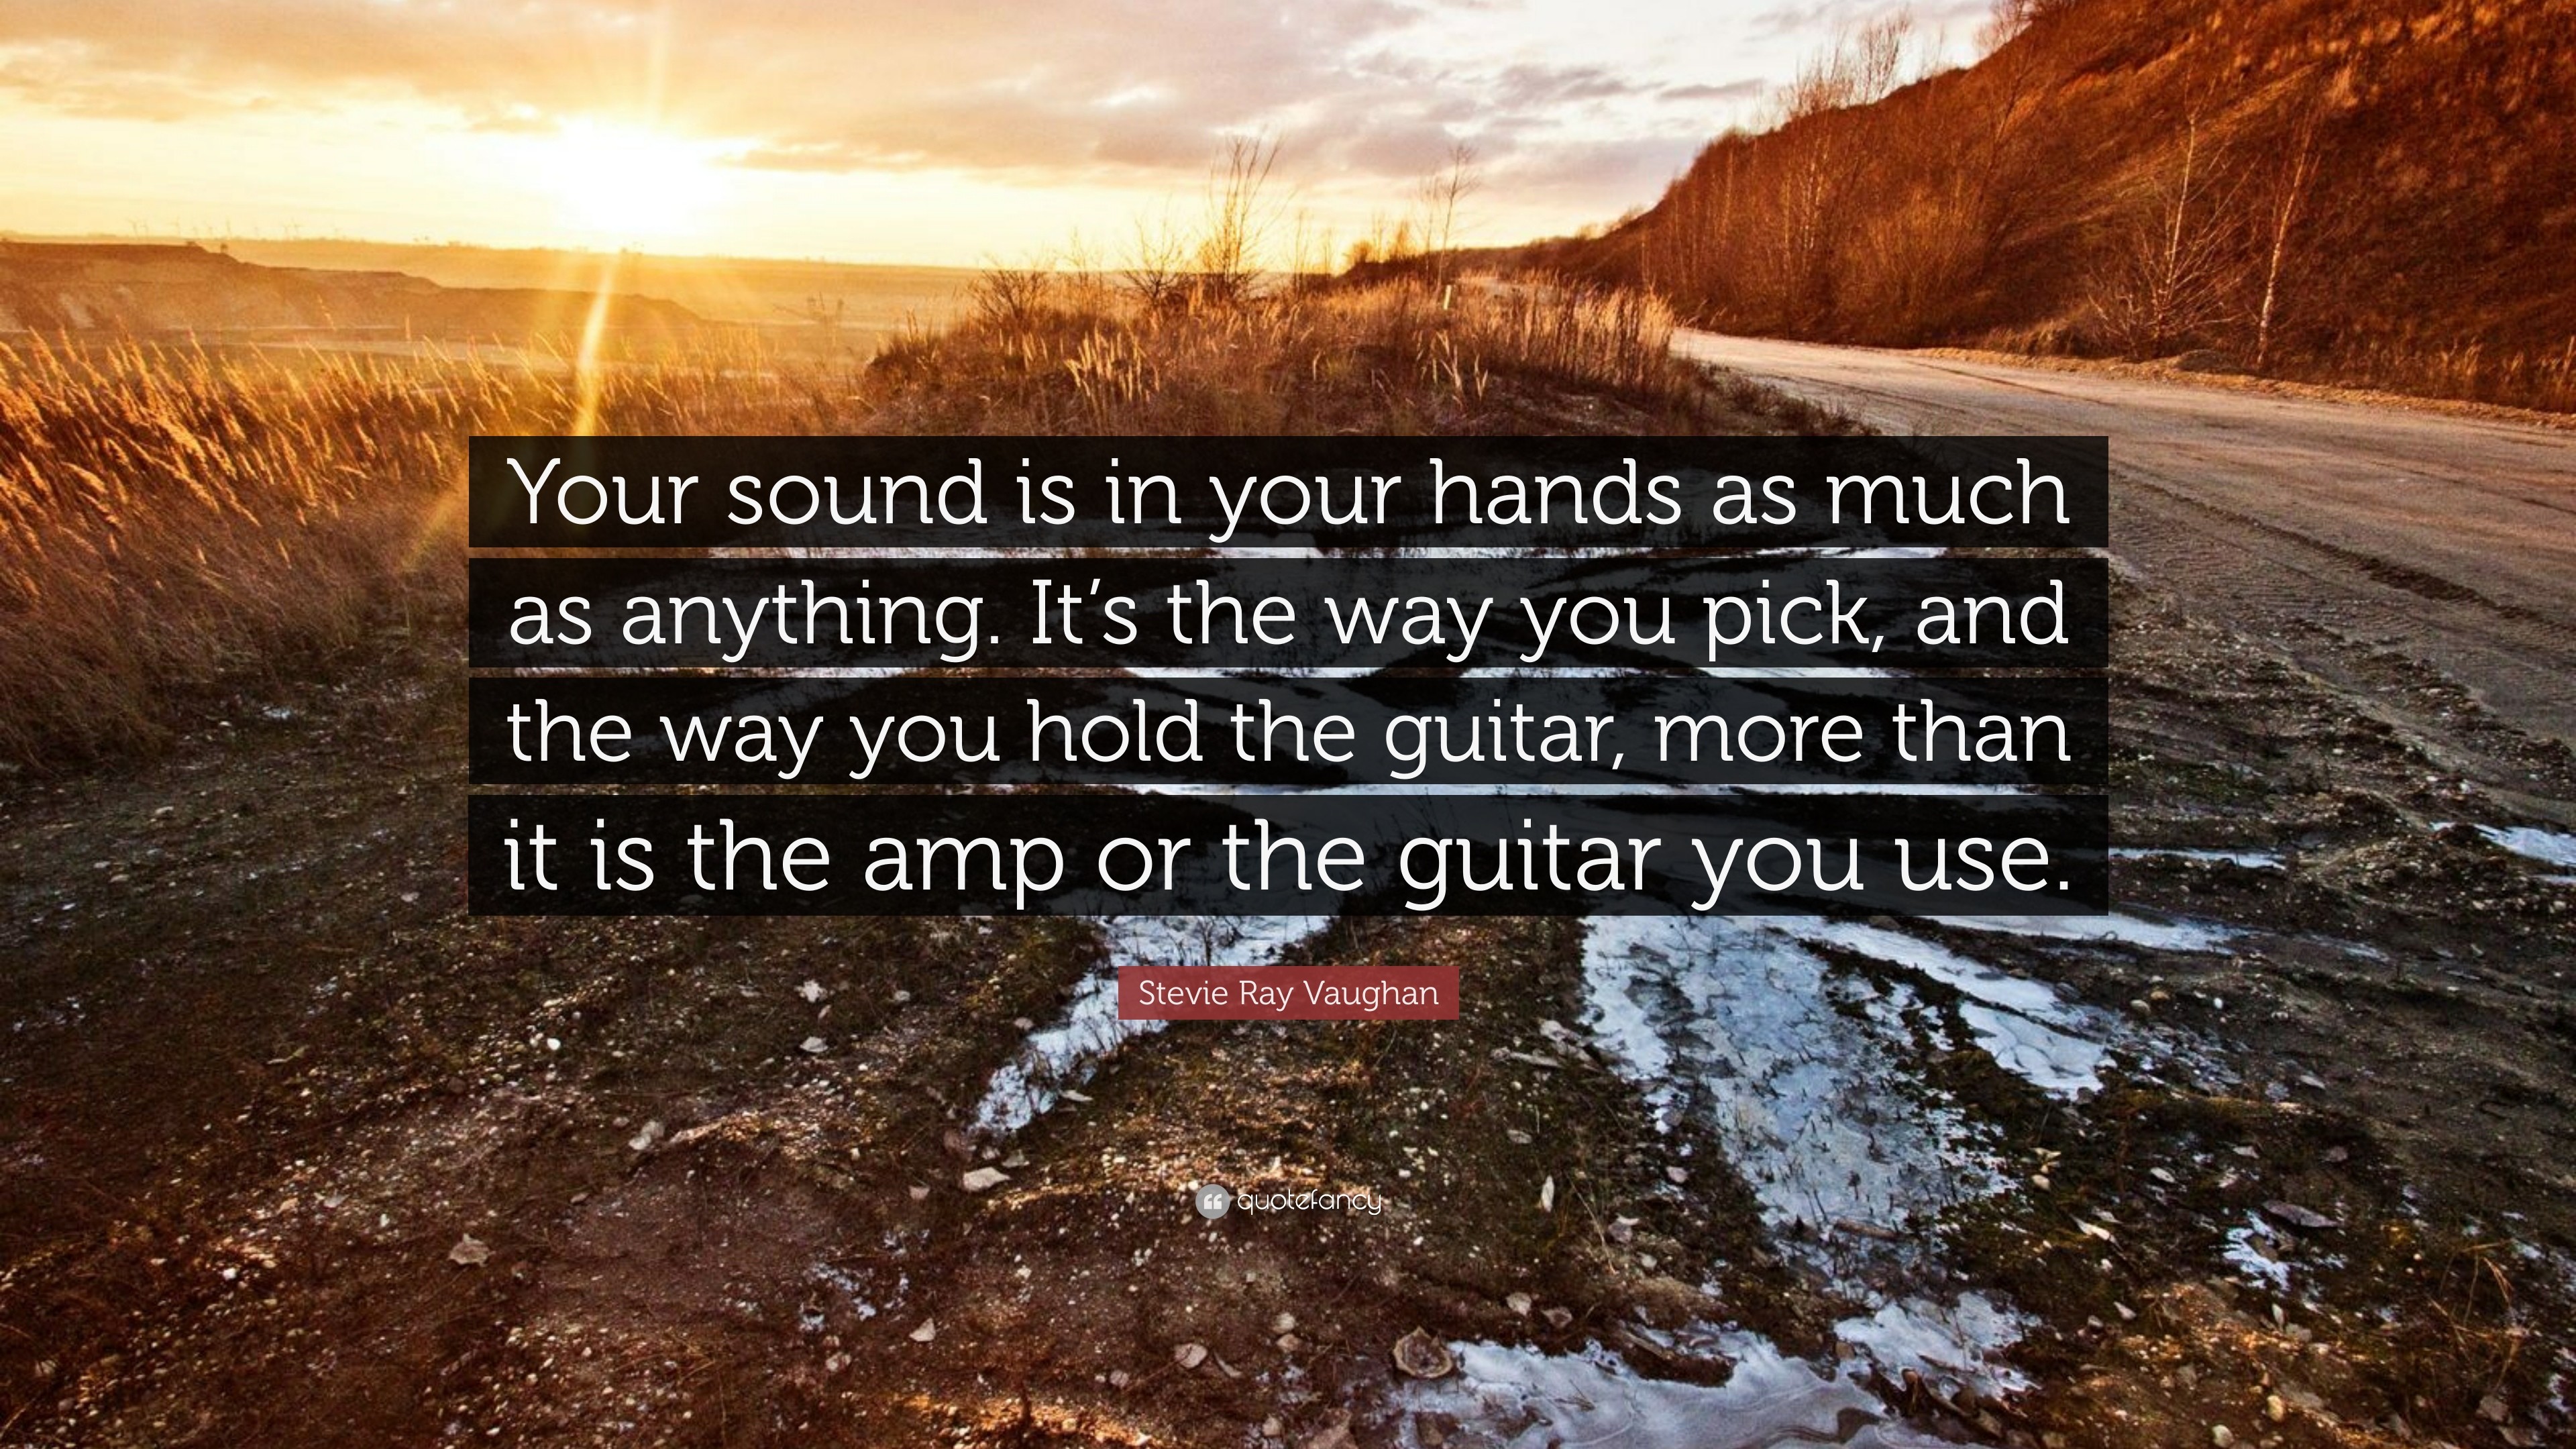 3840x2160 Stevie Ray Vaughan Quote: “Your sound is in your hands as much as anything